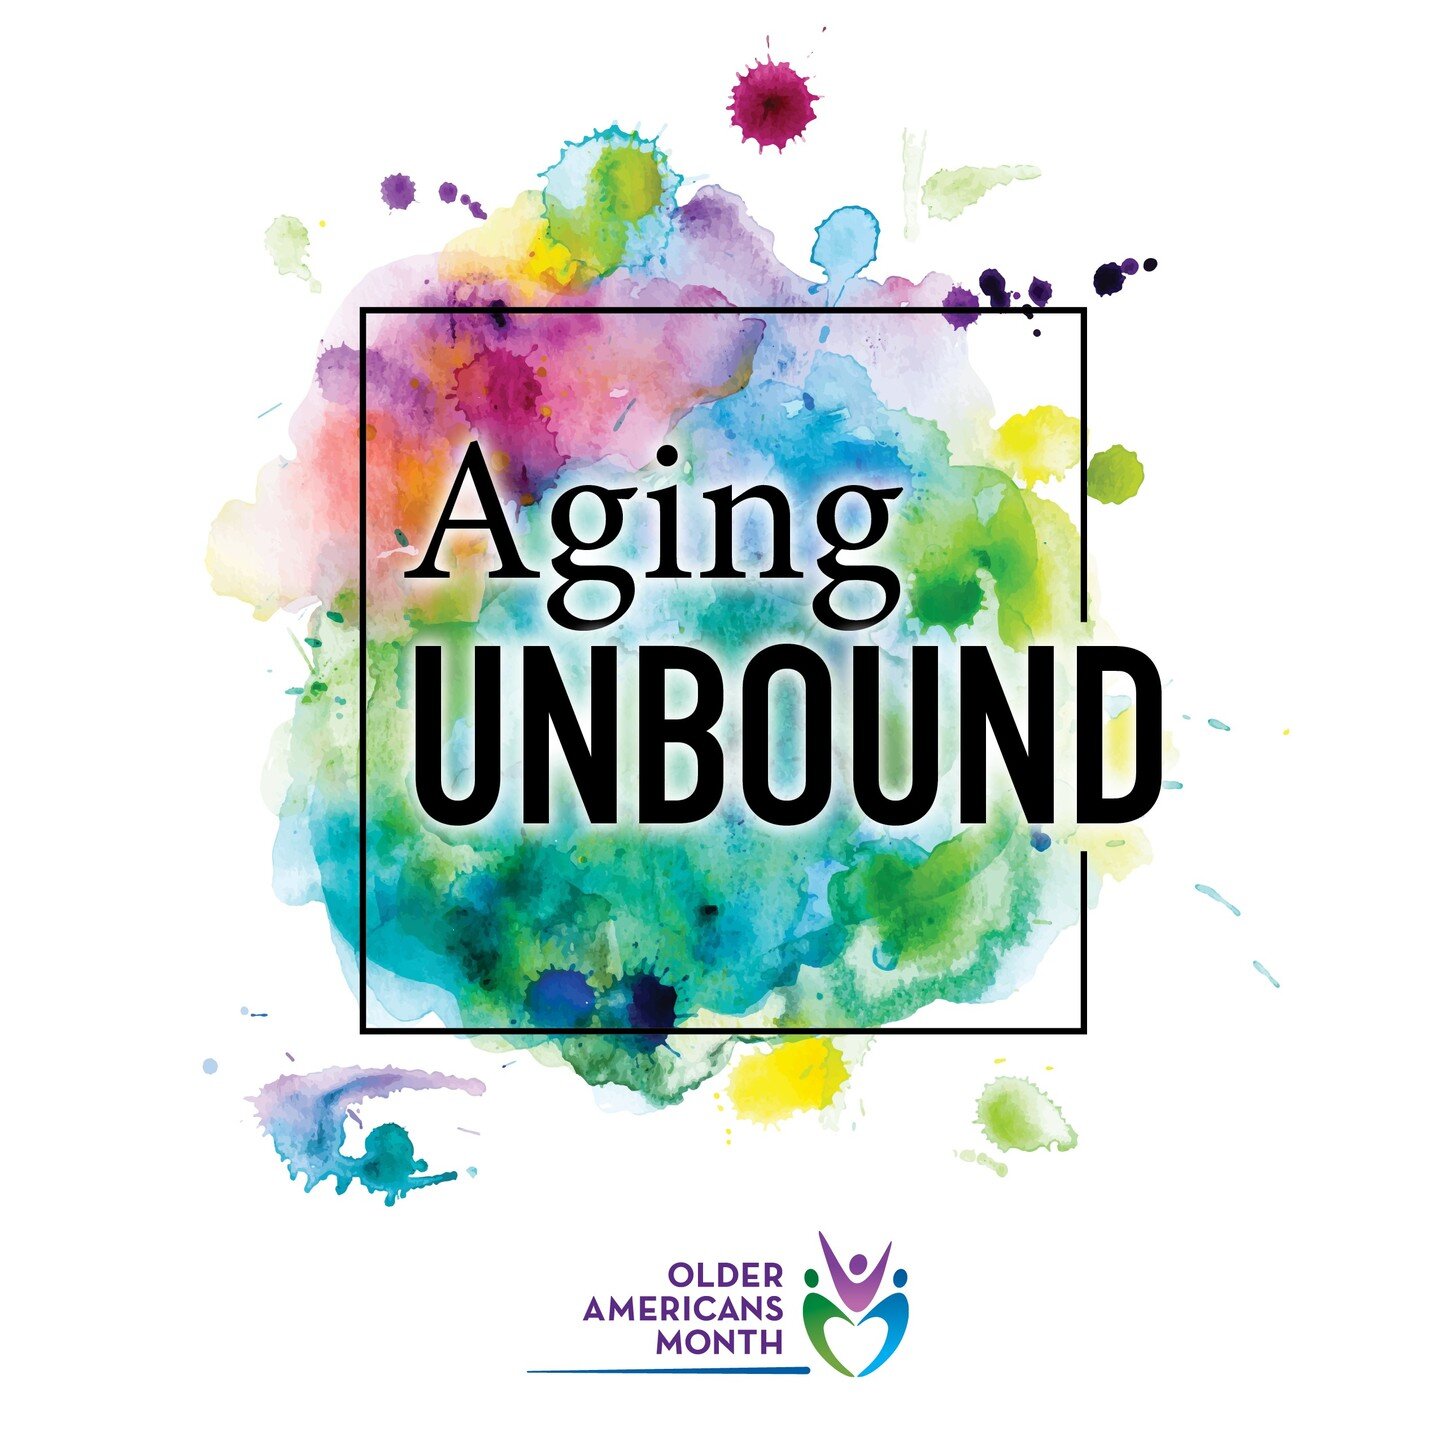 Imagine if we thought about aging as an unbound experience, full of potential and limitless possibilities. 
Think about what your life would look like and the path you would create to your own elderhood.

Don't let #ageism get in your way. Let aging 